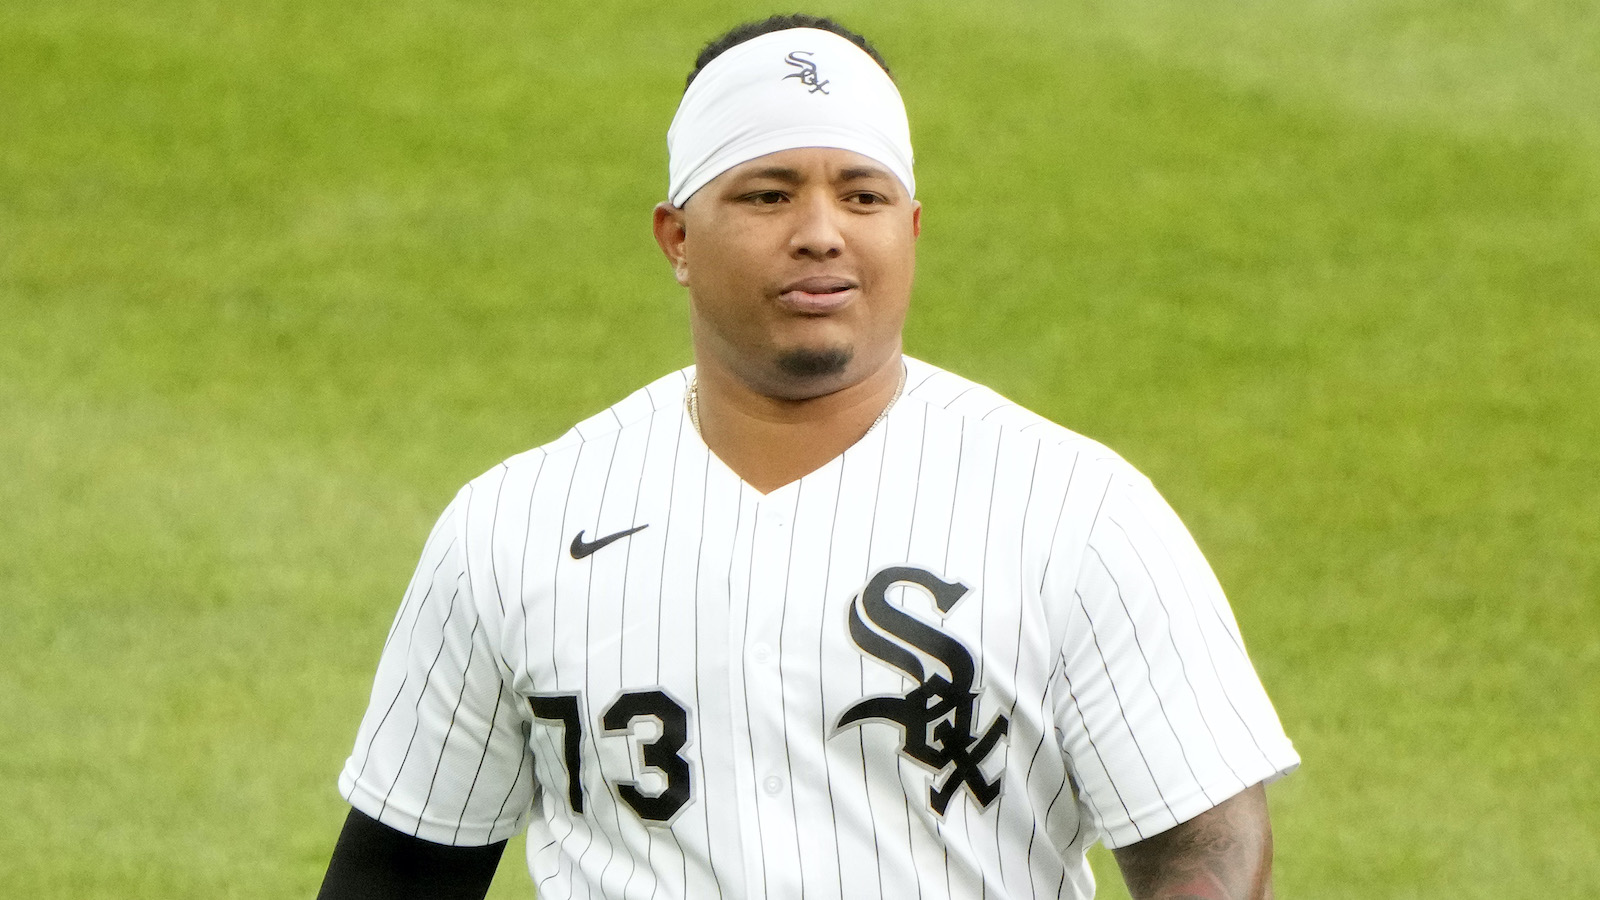 Infamous ex-White Sox player has hilarious reaction to joining Giants